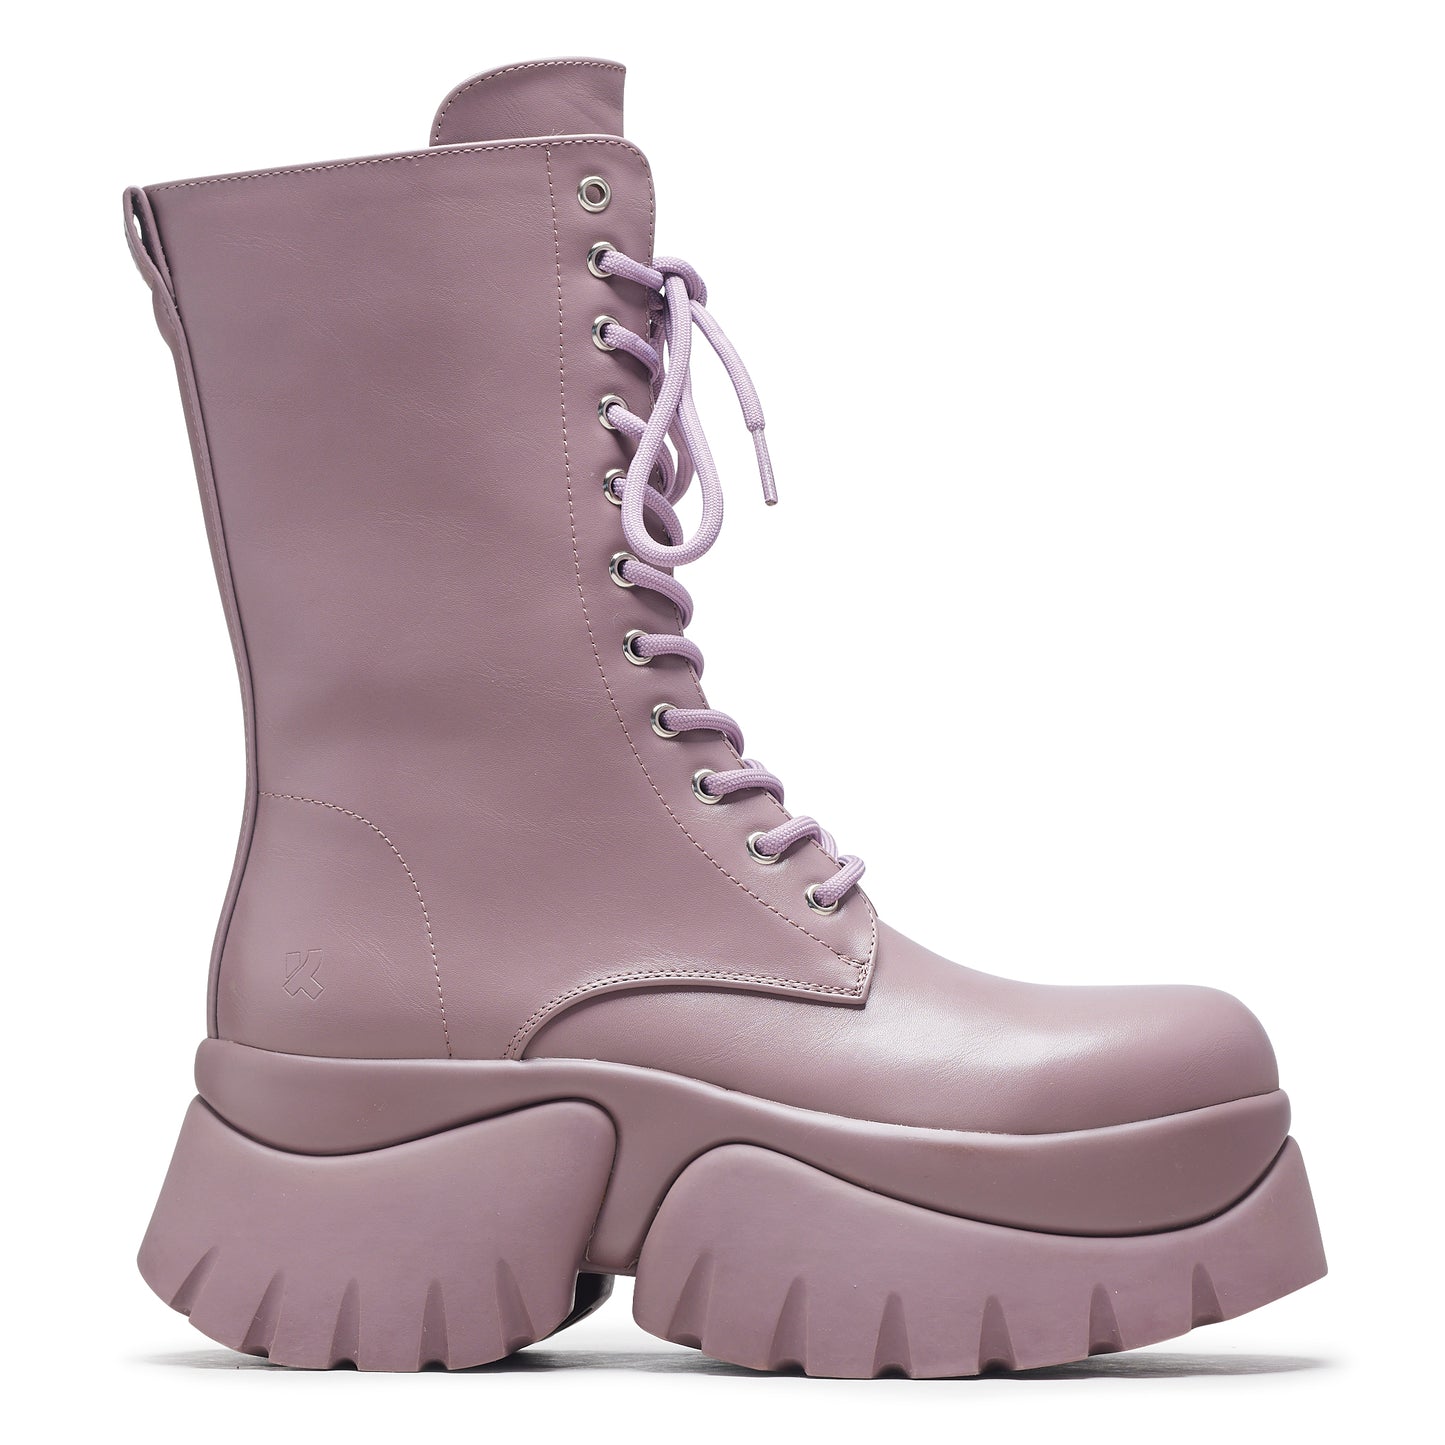 Costal Cruiser Vilun Ankle Boots - Mauve - Ankle Boots - KOI Footwear - Purple - Side View